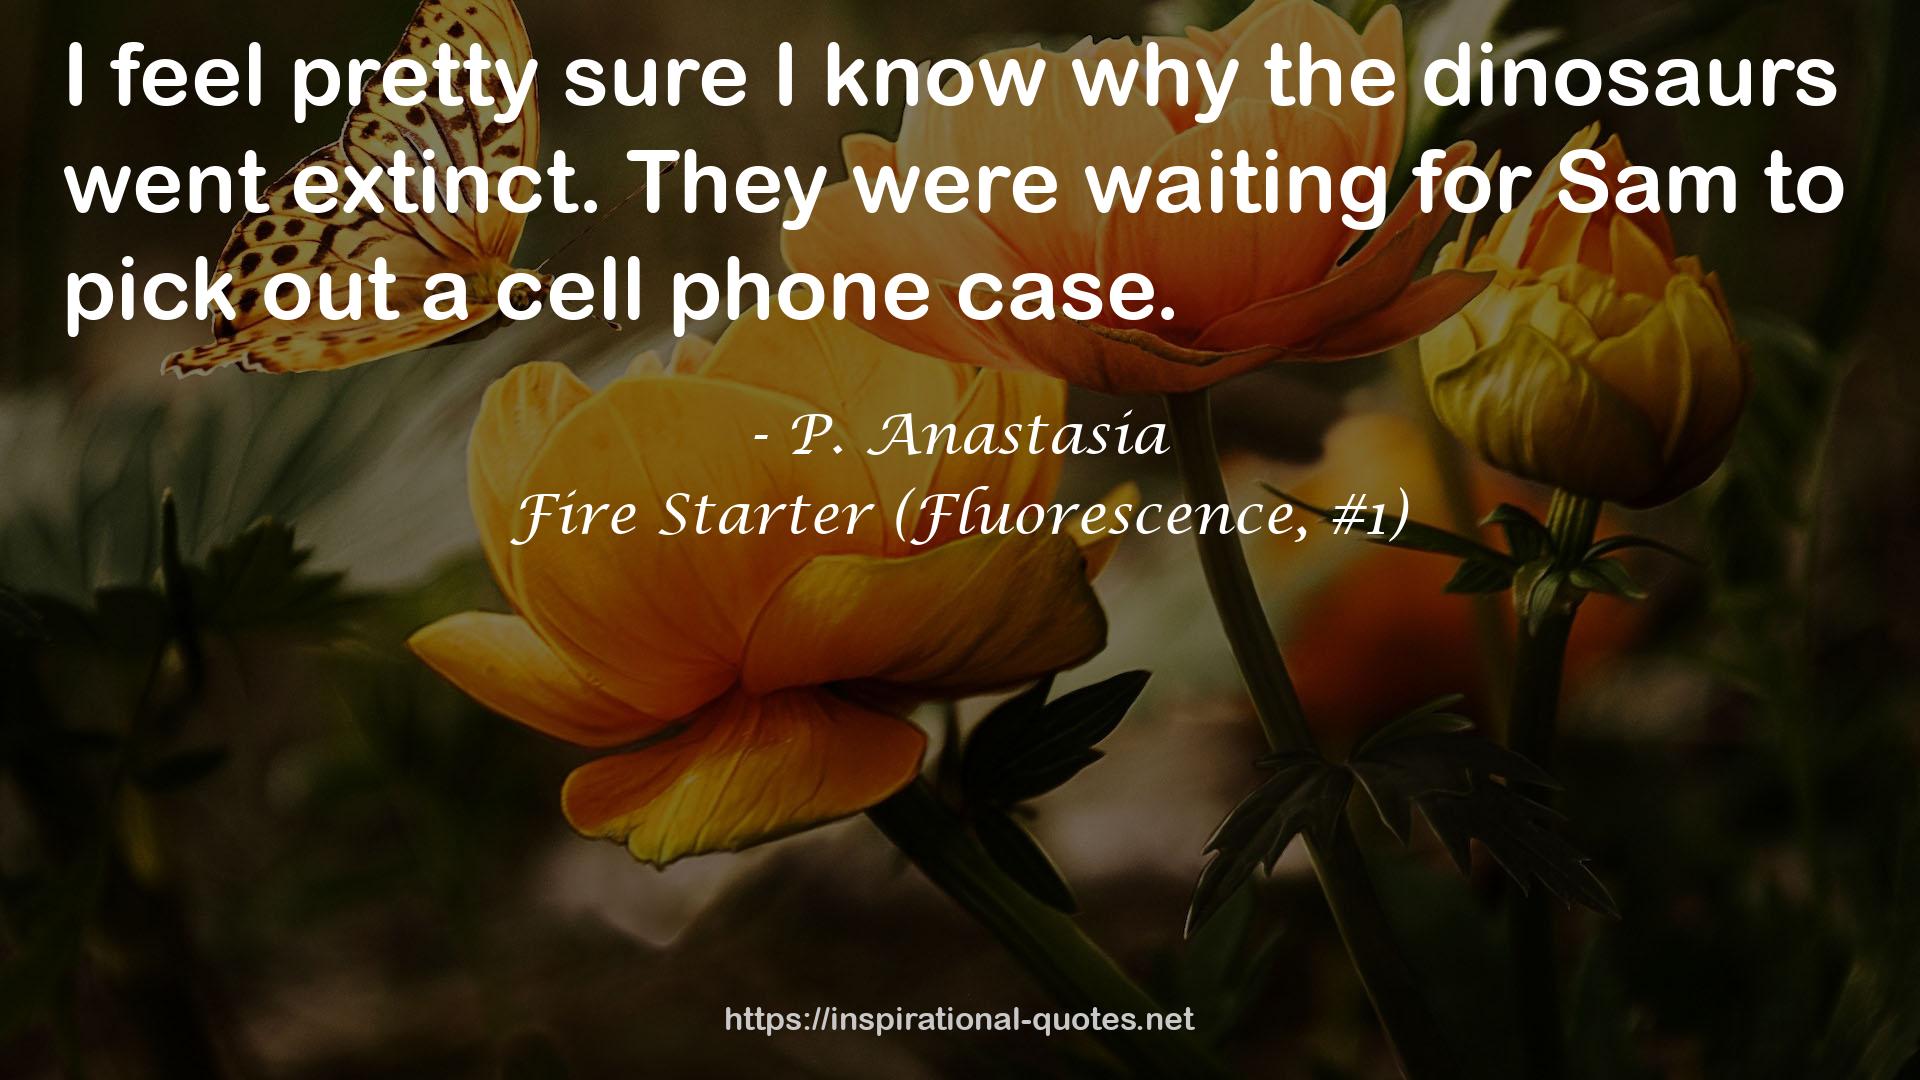 Fire Starter (Fluorescence, #1) QUOTES